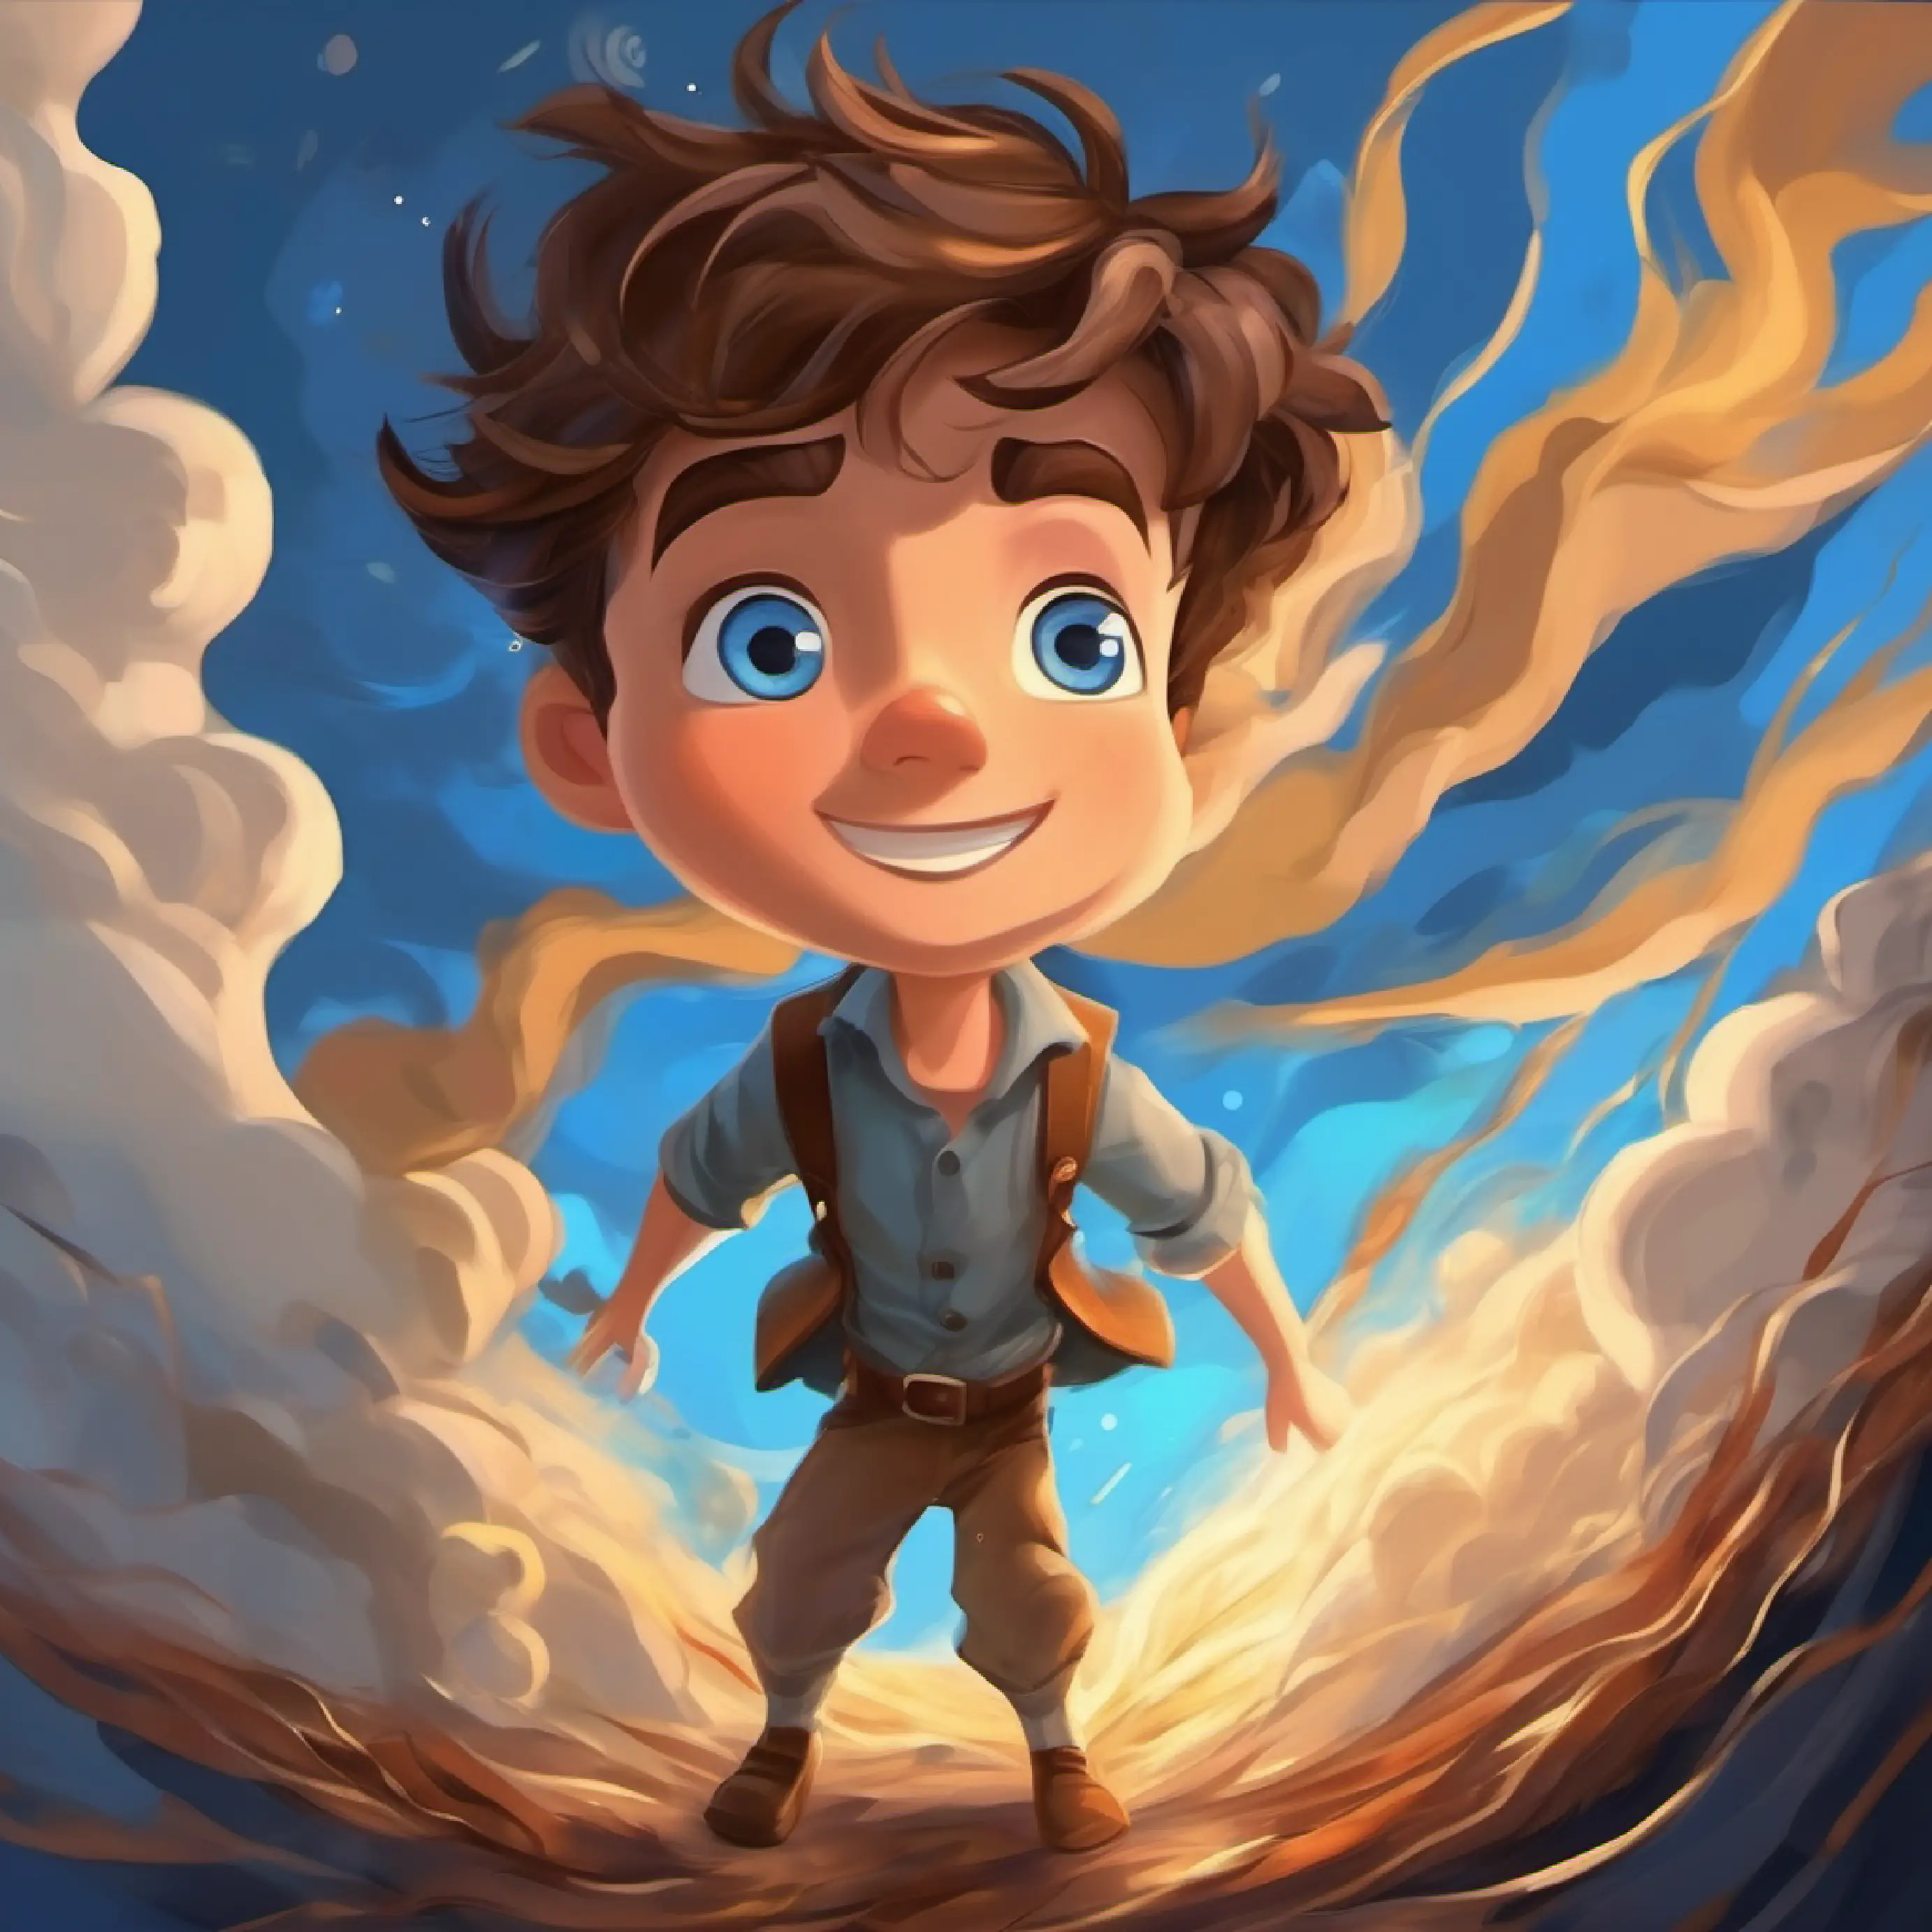 Young boy, adventurous spirit, brown hair, blue eyes bravely accepts his role and is lifted by the tornado.